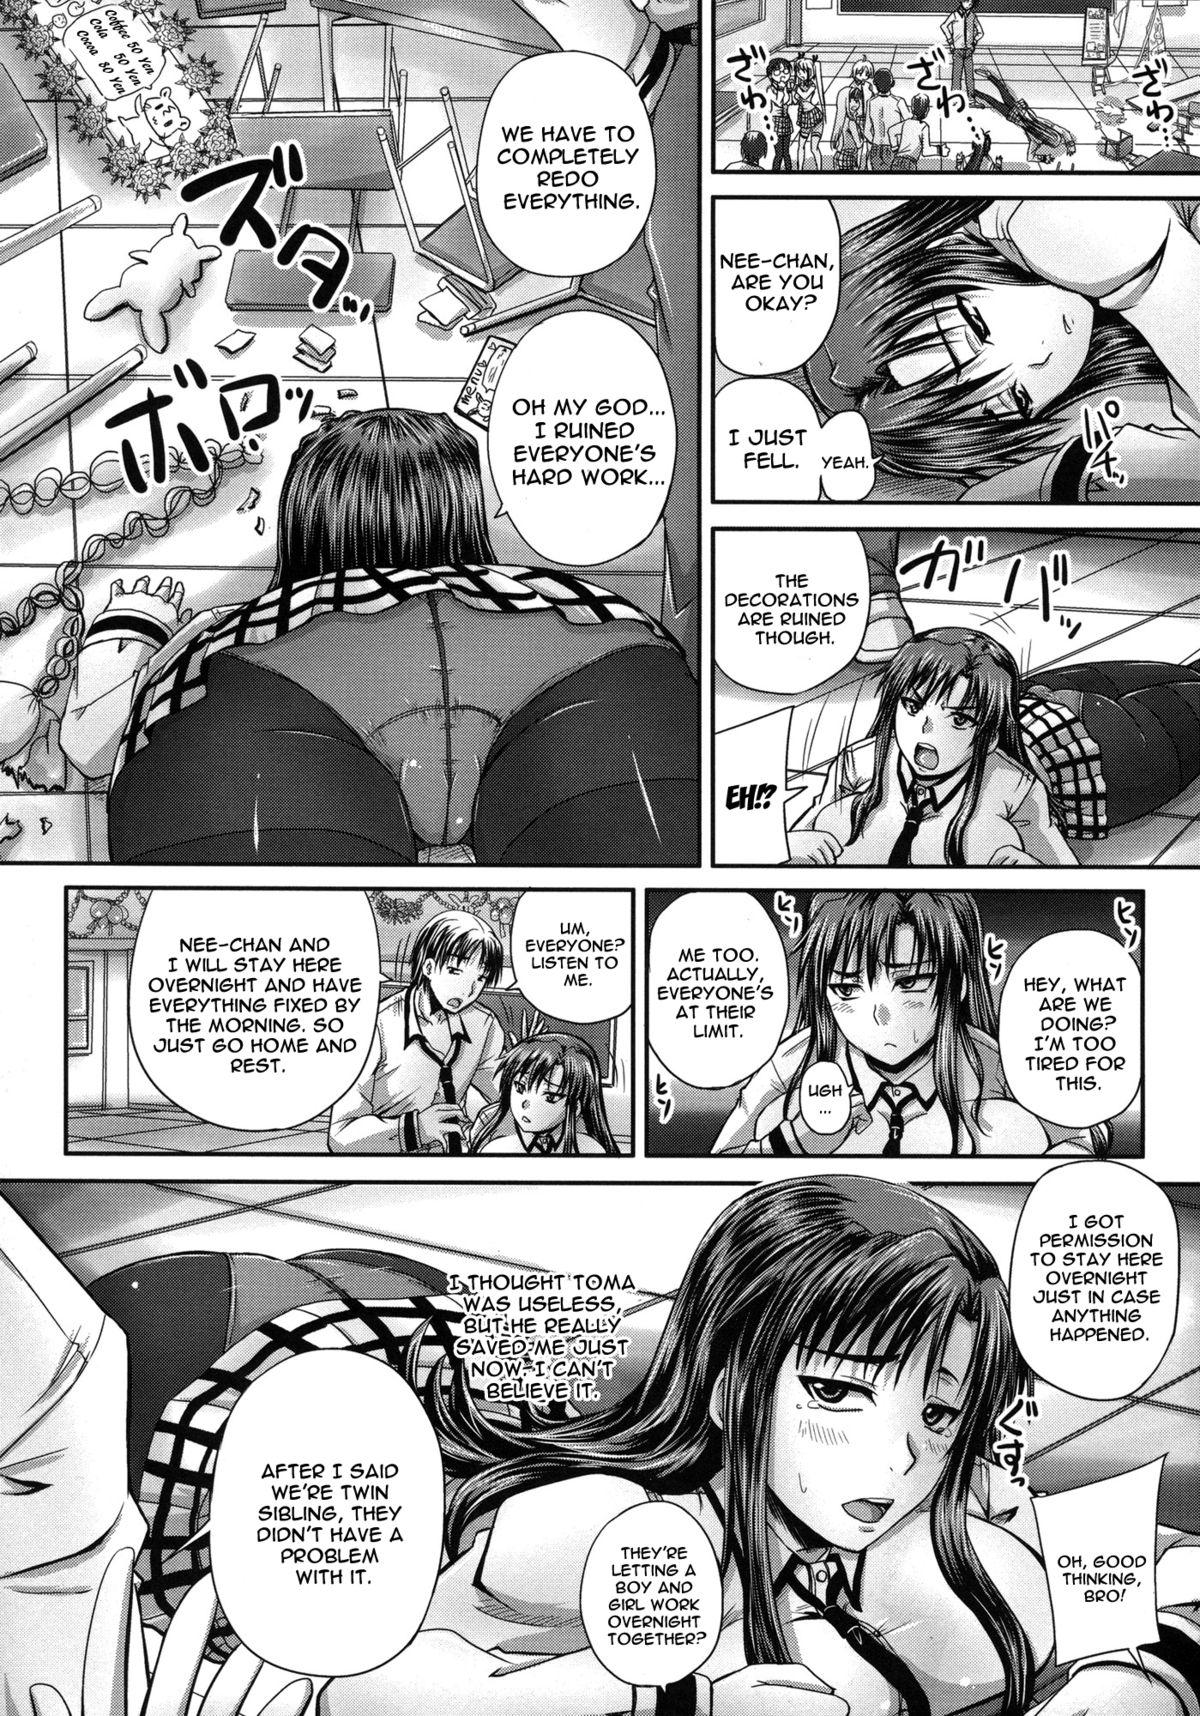 Super [Akigami Satoru] Tsukurou! Onaho Ane - Let's made a Sex Sleeve from Sister | Turning My Elder-Sister into a Sex-Sleeve [English] {doujin-moe.us} Casting - Page 12